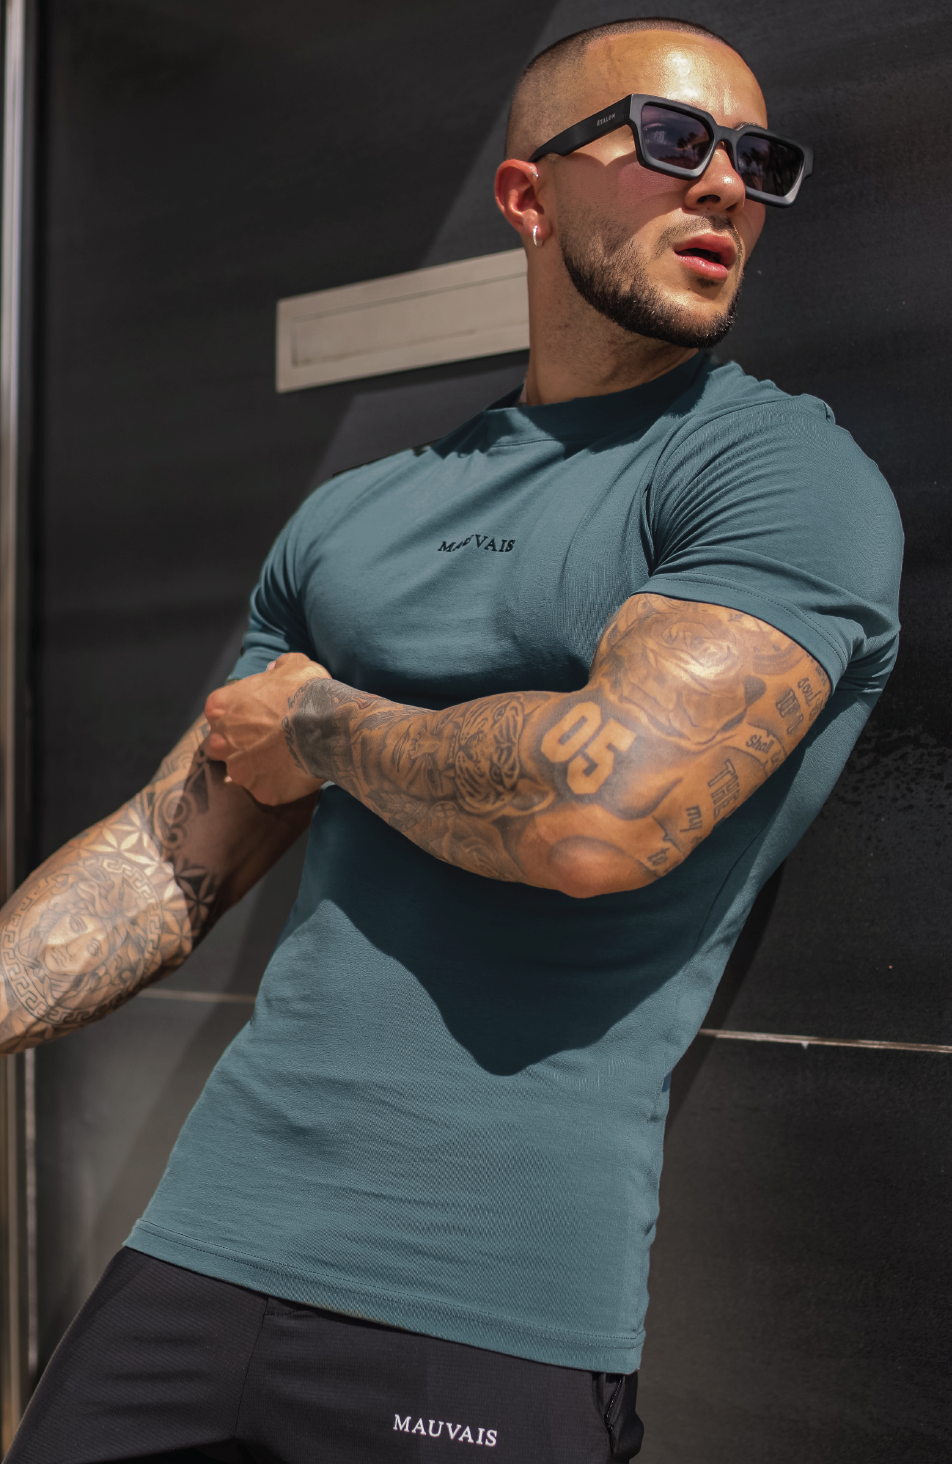 Muscle Fit Tee in Teal